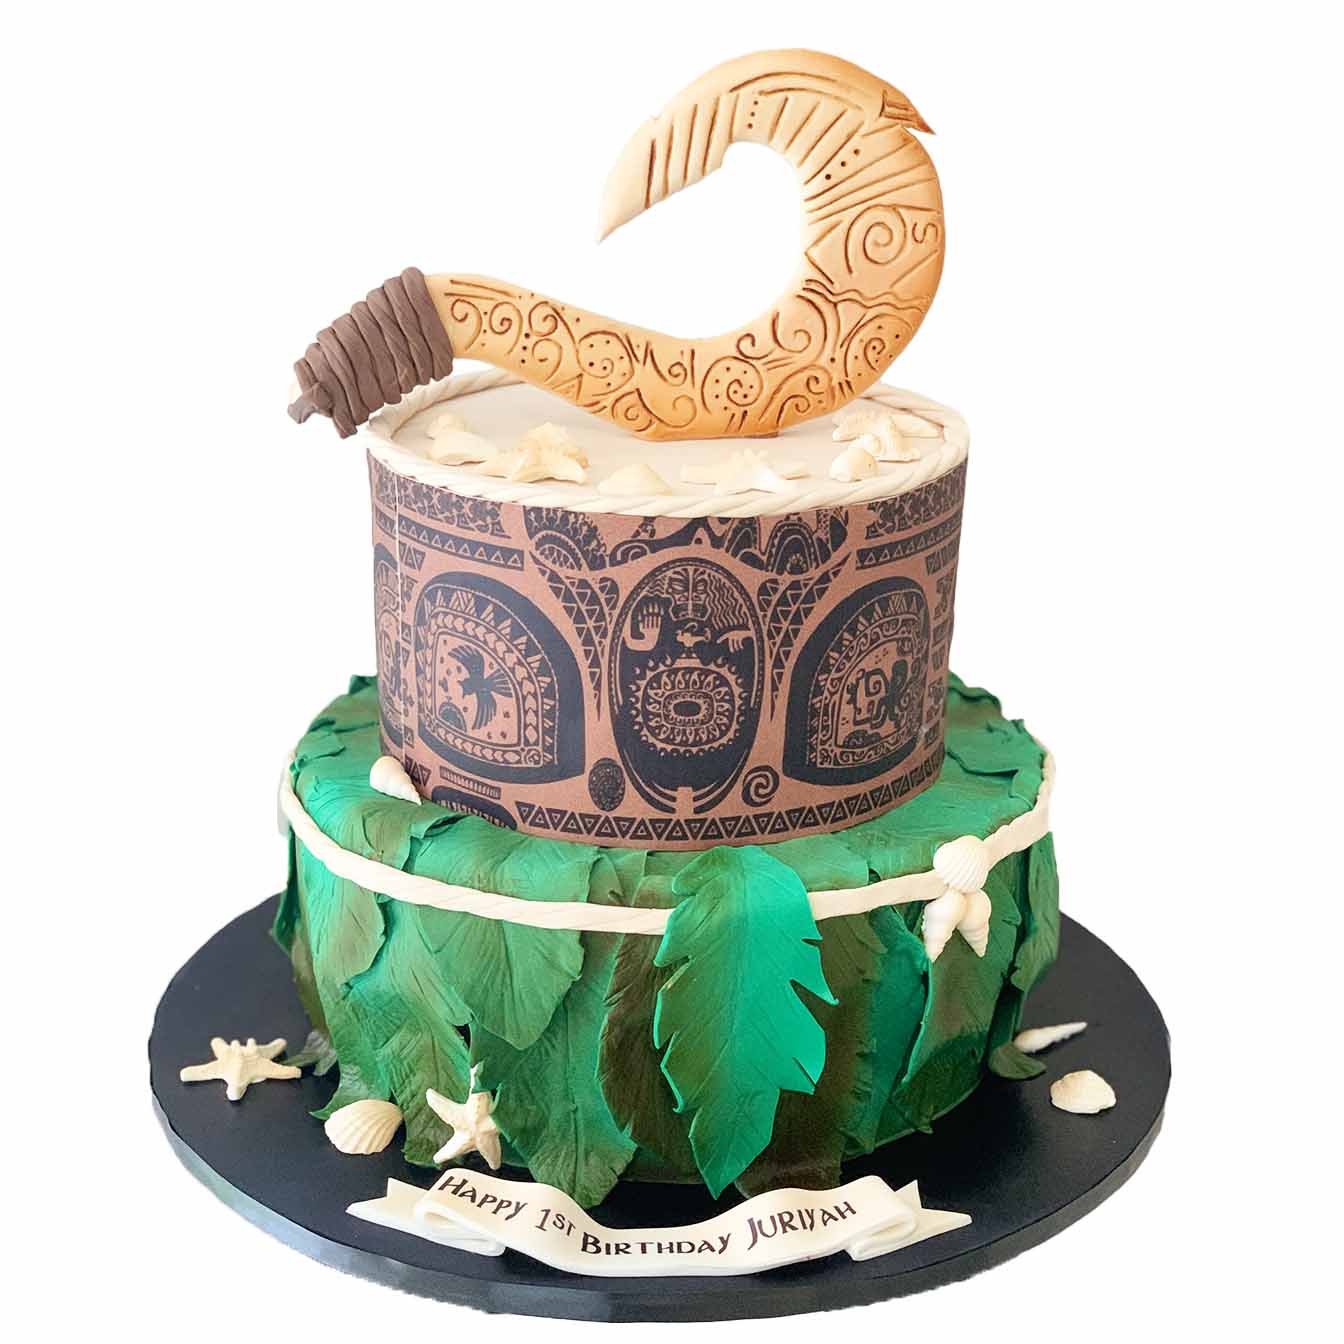 Maui's Hook Adventure Cake - A 2-tier cake featuring a moulded hook from Moana and an image wrap of Maui's tattoos, with palm leaves and shells on the base tier, a captivating centrepiece for a Polynesian-inspired celebration.